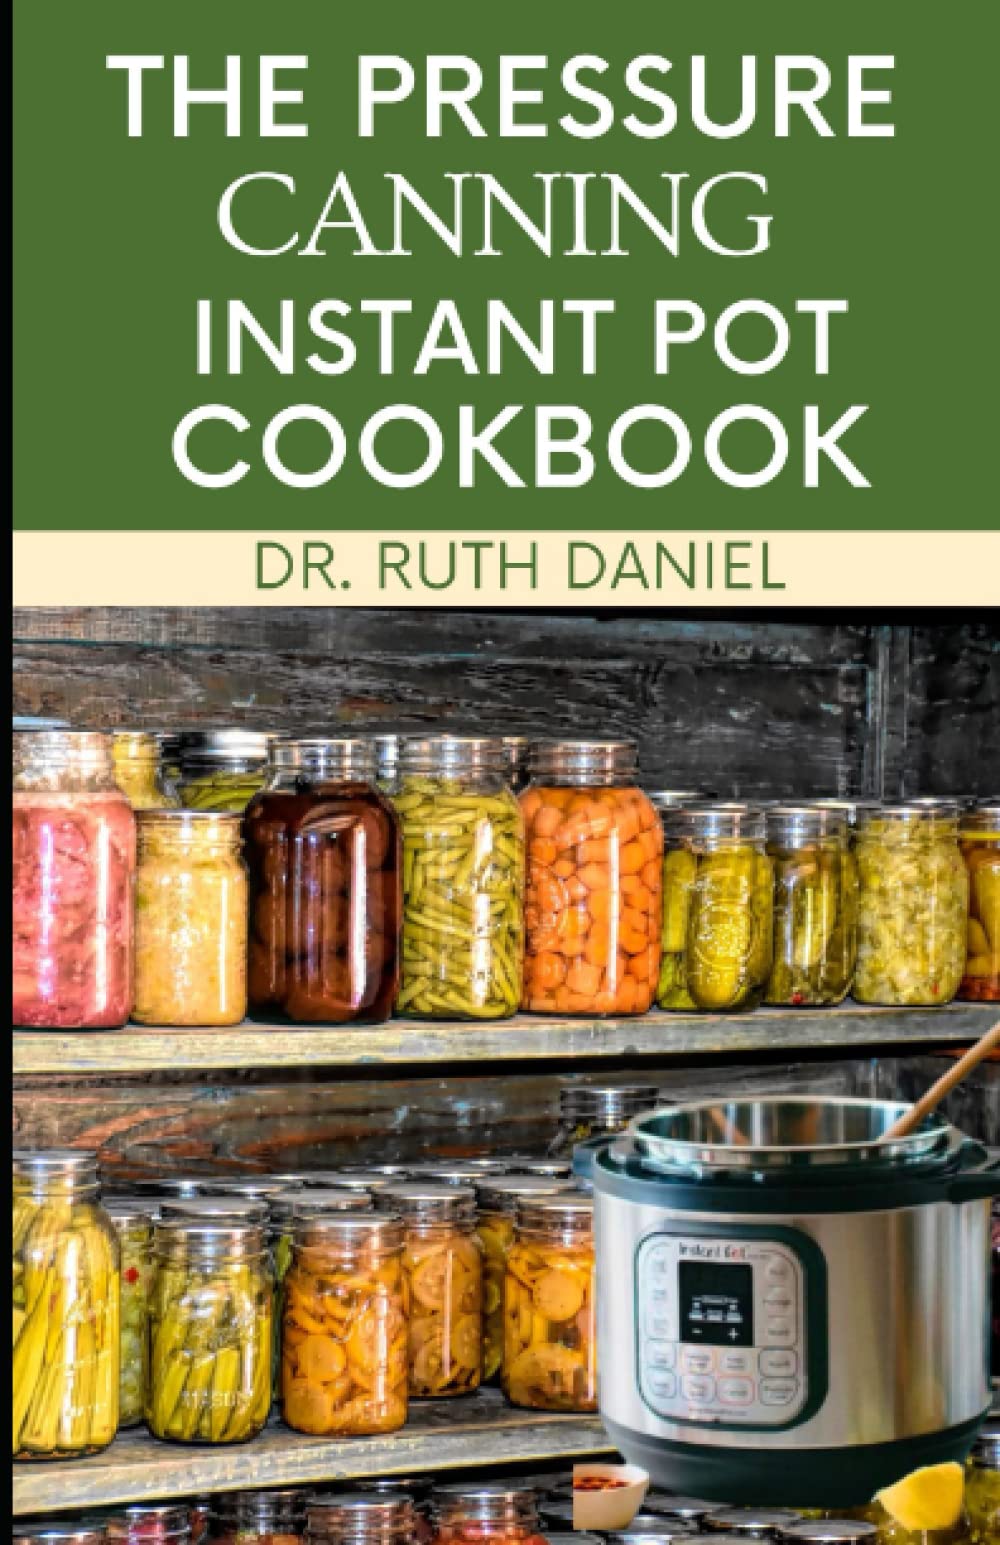 THE PRESSURE CANNING INSTANT POT COOKBOOK: DISCOVER SEVERAL DELICIOUS PRESSURE CANNING RECIPES TO TRY FROM THE COMFORT OF YOUR HOUSE